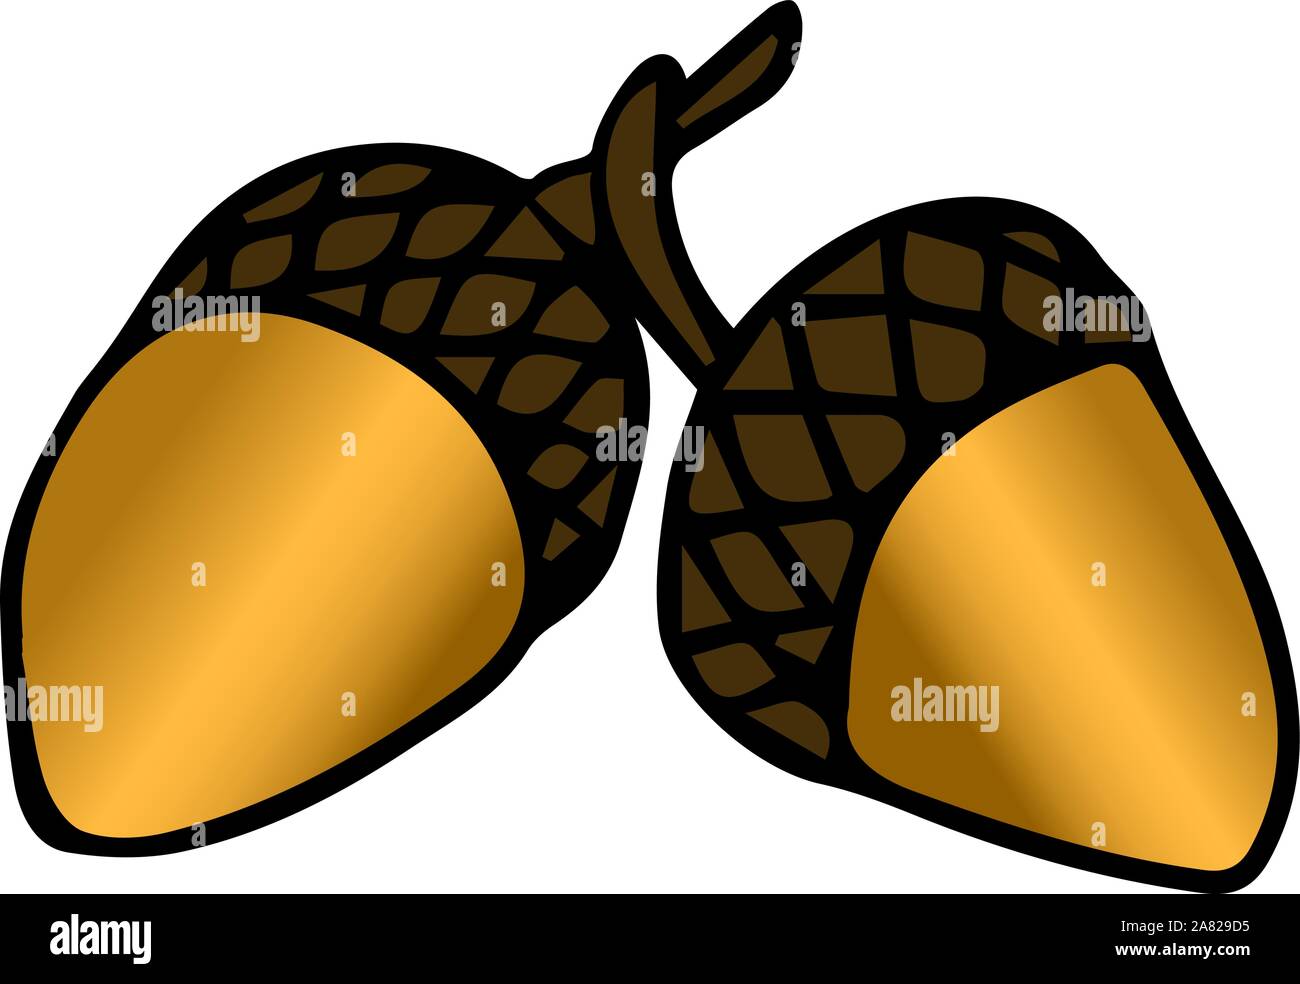 A pair of acron, illustration, vector on white background. Stock Vector